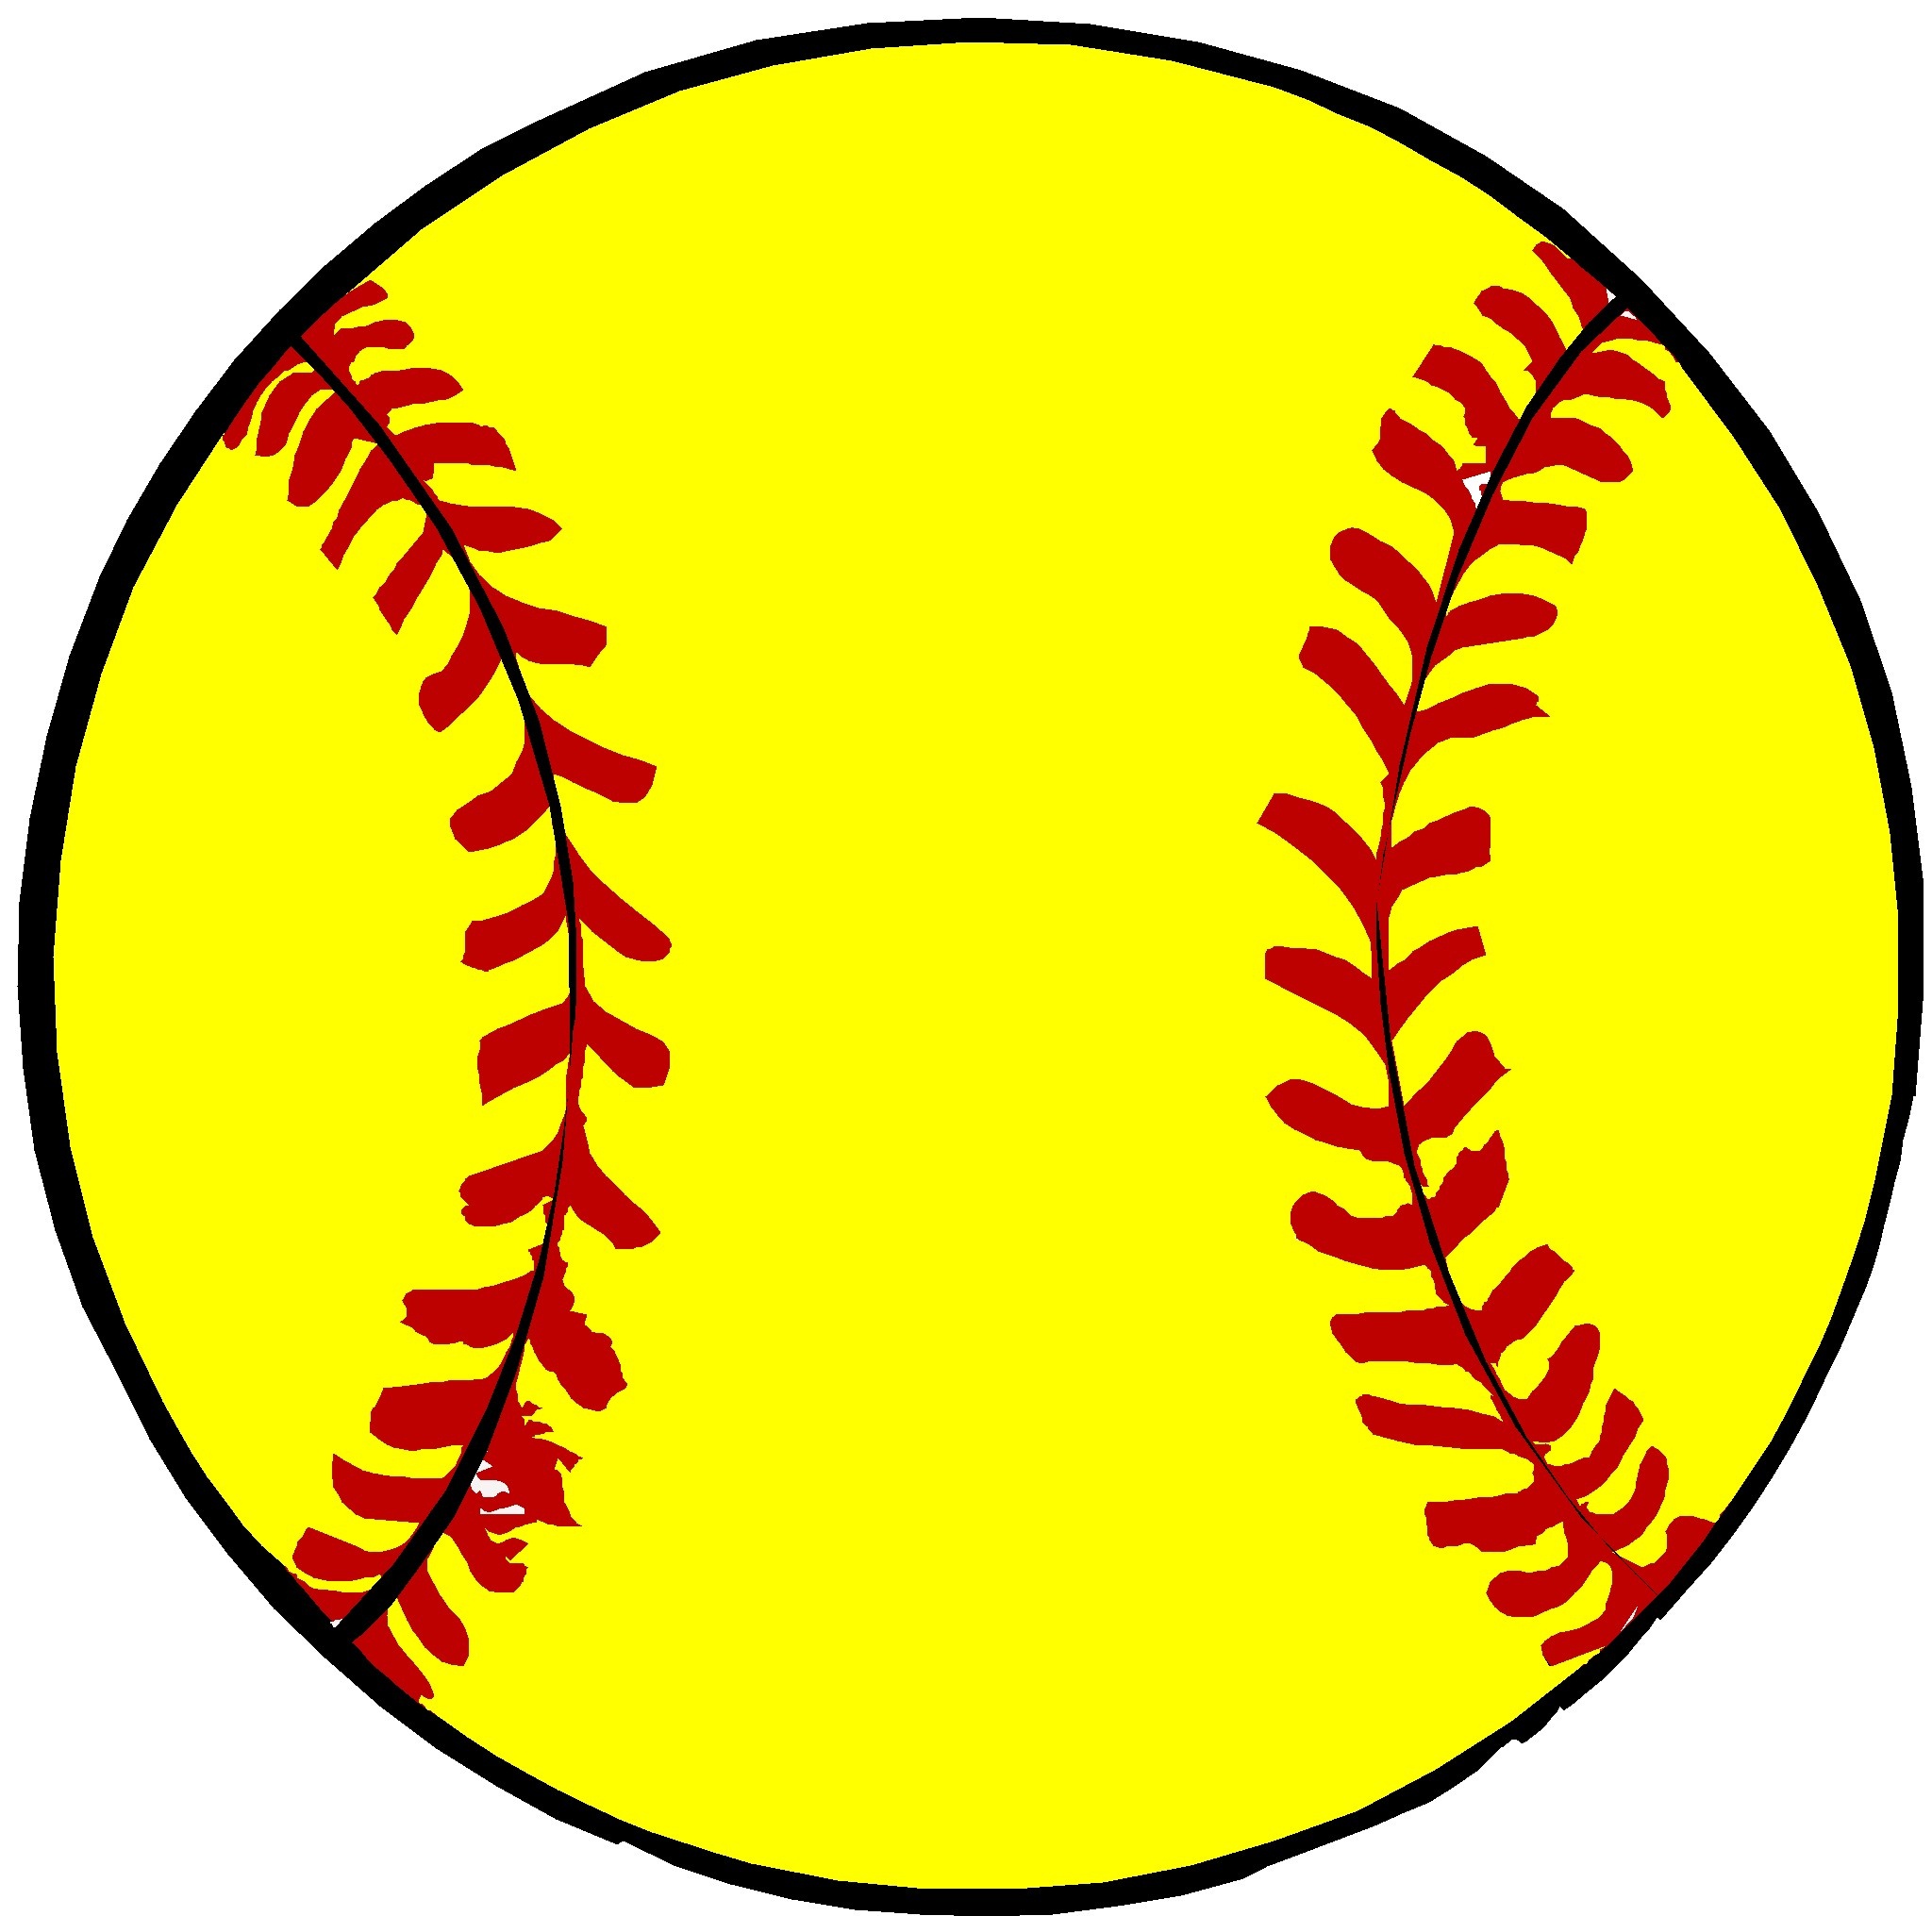 Free Softball Clipart | Free Download Best Free Softball Clipart On - Free Printable Softball Images